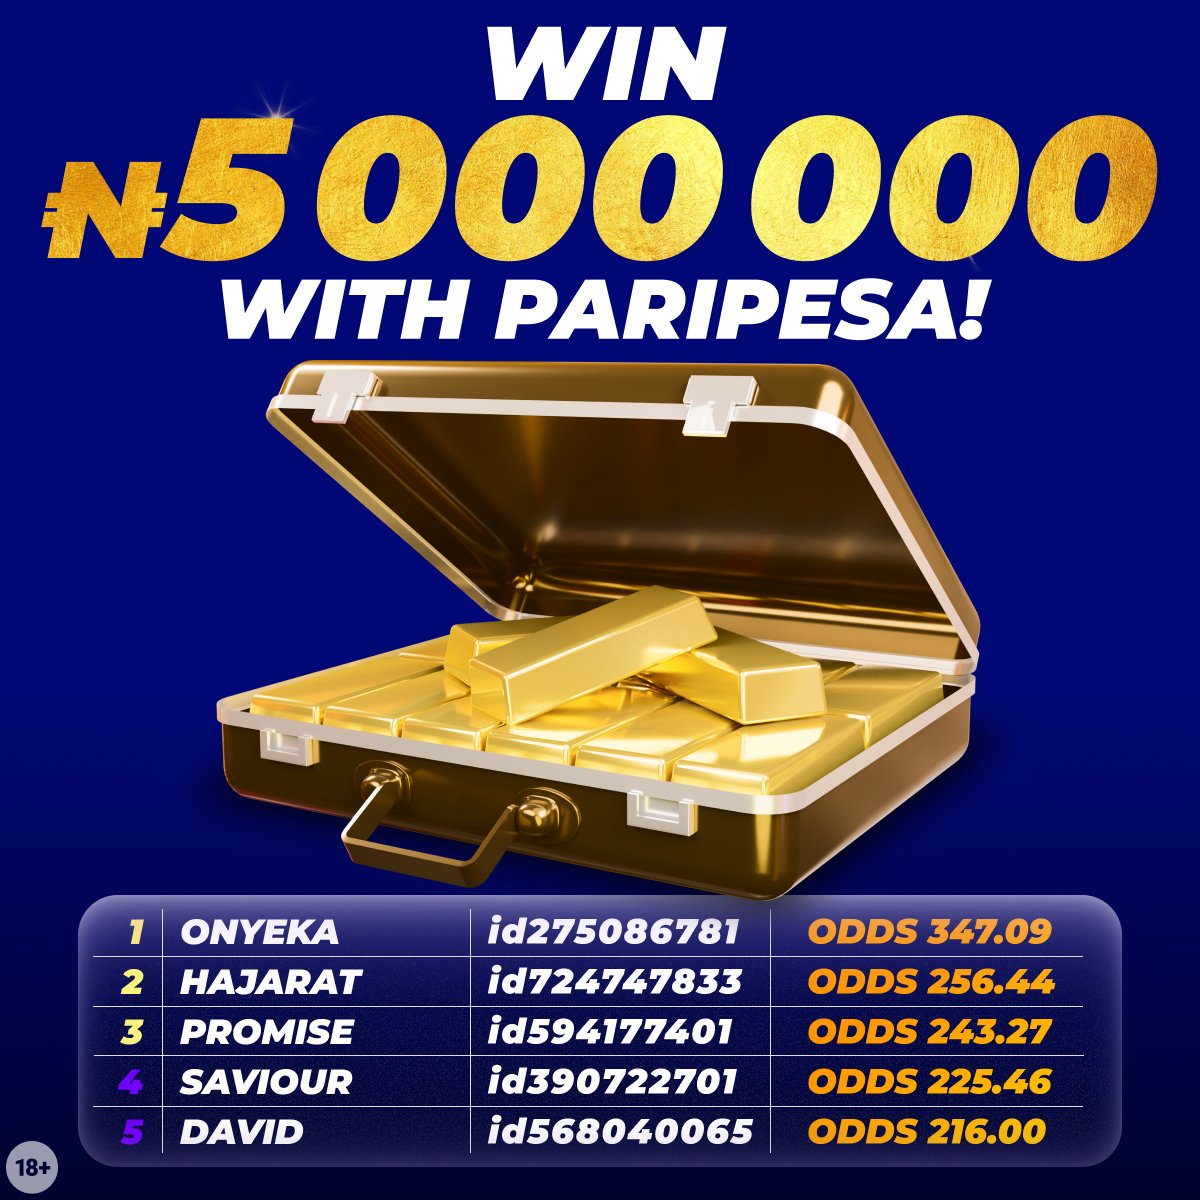 📢 ₦ 5,000,000 WITH PARIPESA! ‼ Lots of changes! 🔸Place an accumulator bet of at least ₦30 on any sports events 🔸Bet with the highest ODDS during the calendar month! 💰All rules: m.paripesa.bet/521